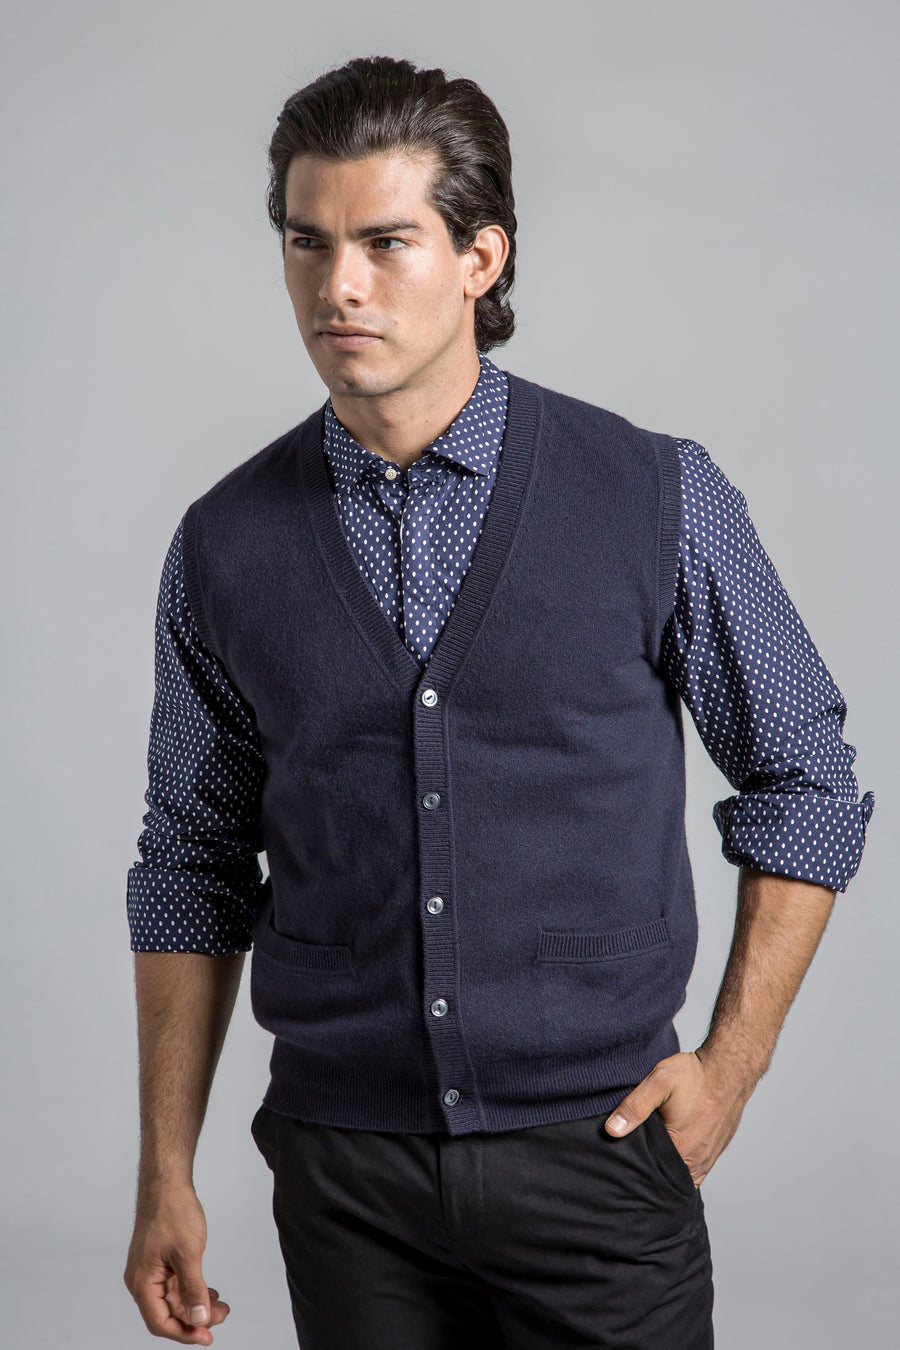 pine cashmere mens classic 100% pure cashmere v-neck cardigan vest in navy